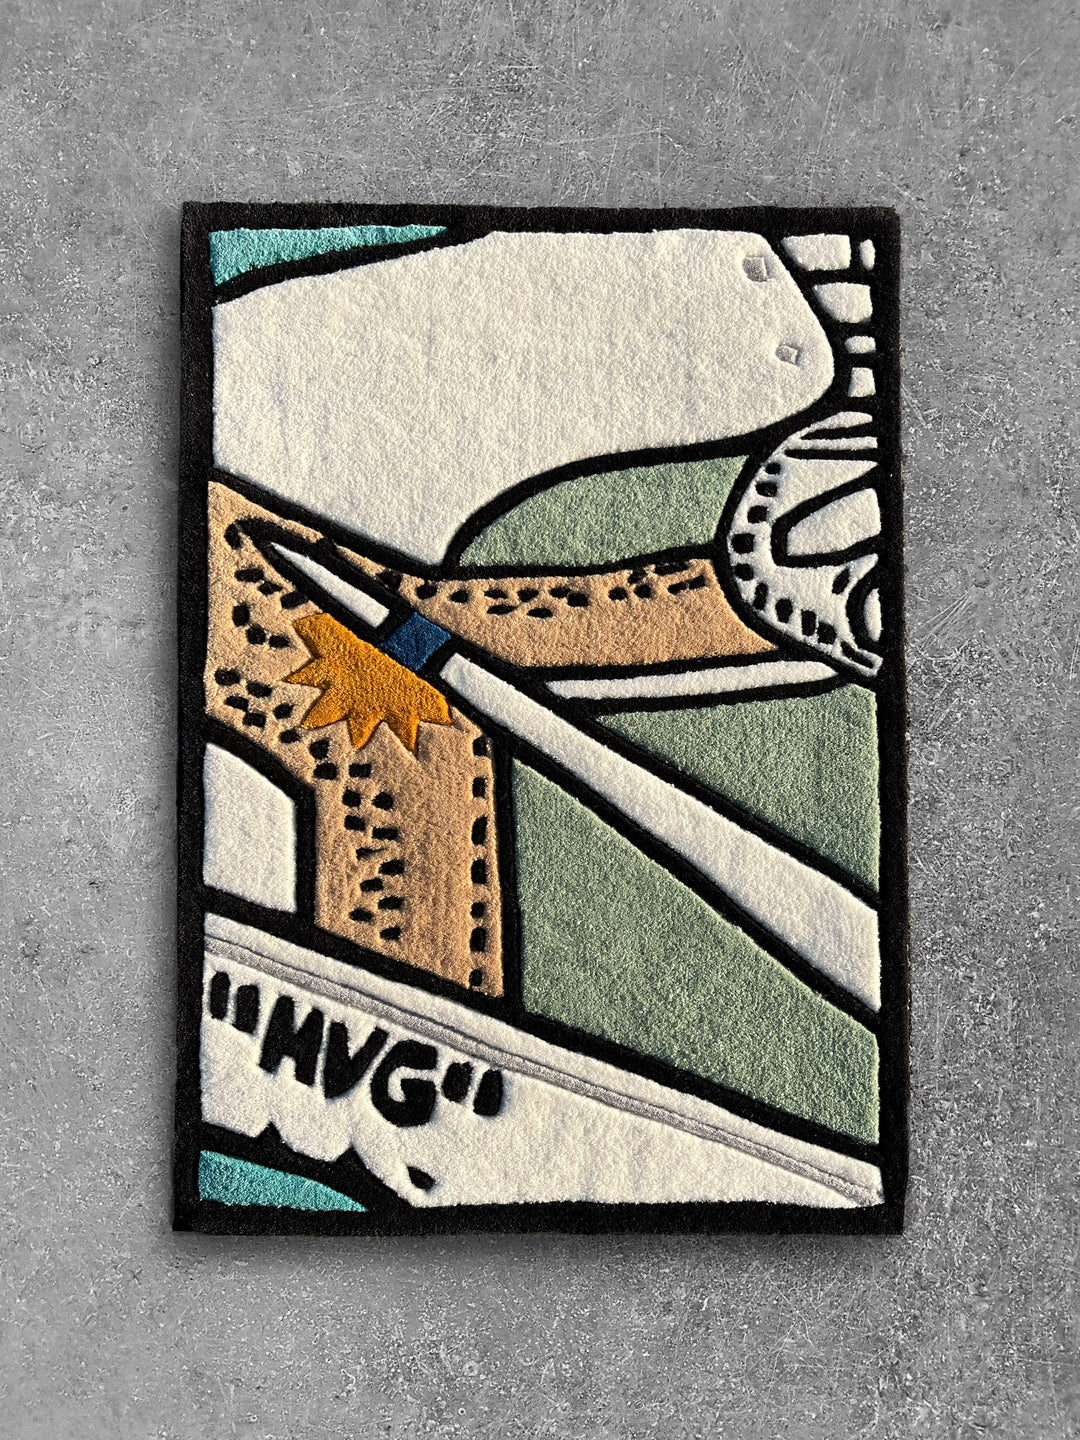 The Sneaker Art 02 Rugs Tuft Place